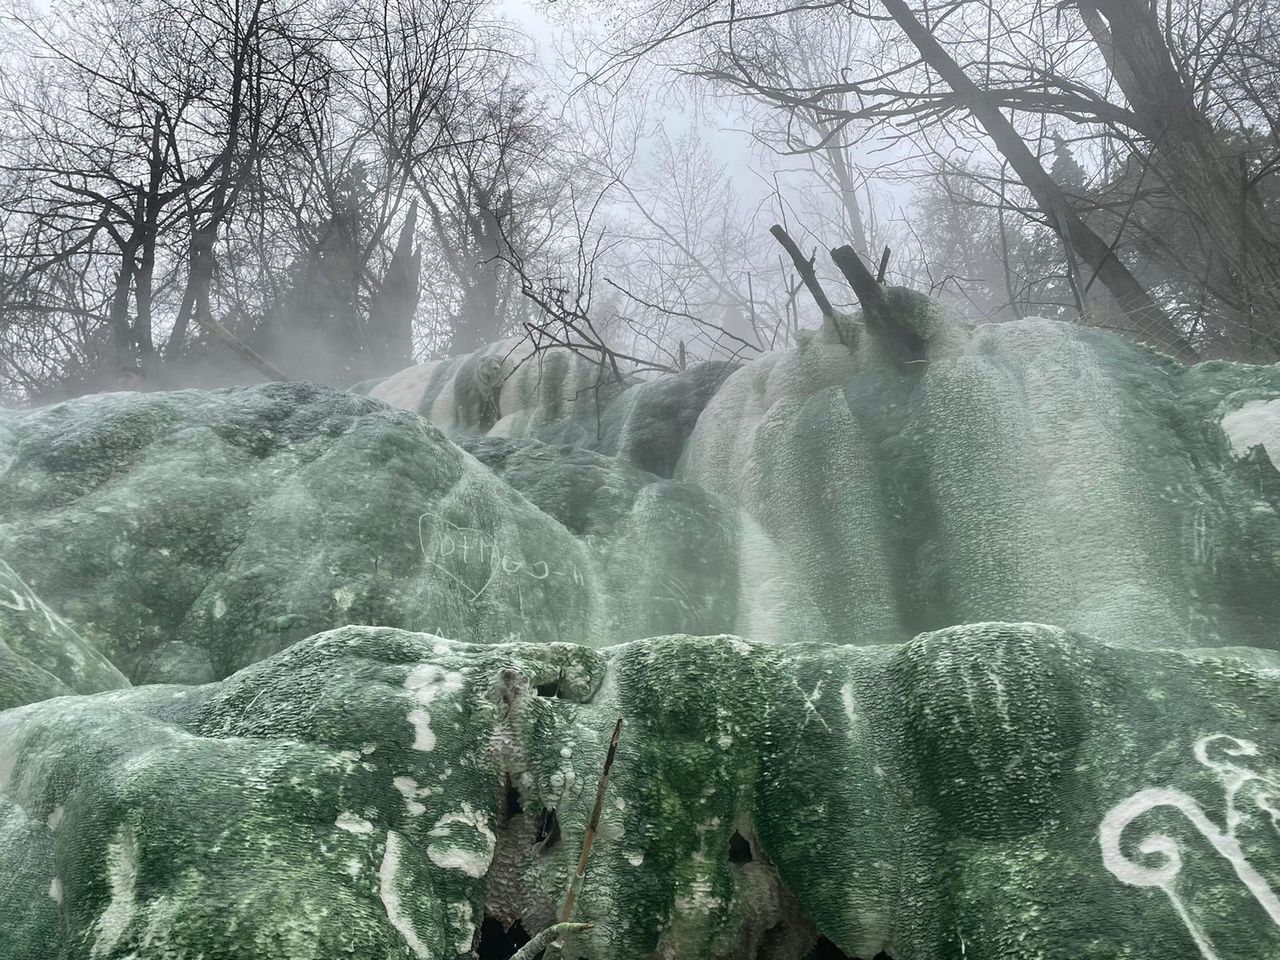 tree, plant, nature, waterfall, frost, no people, fog, snow, bare tree, water, day, beauty in nature, water feature, land, outdoors, environment, scenics - nature, cold temperature, freezing, winter, growth, green, tranquility, ice